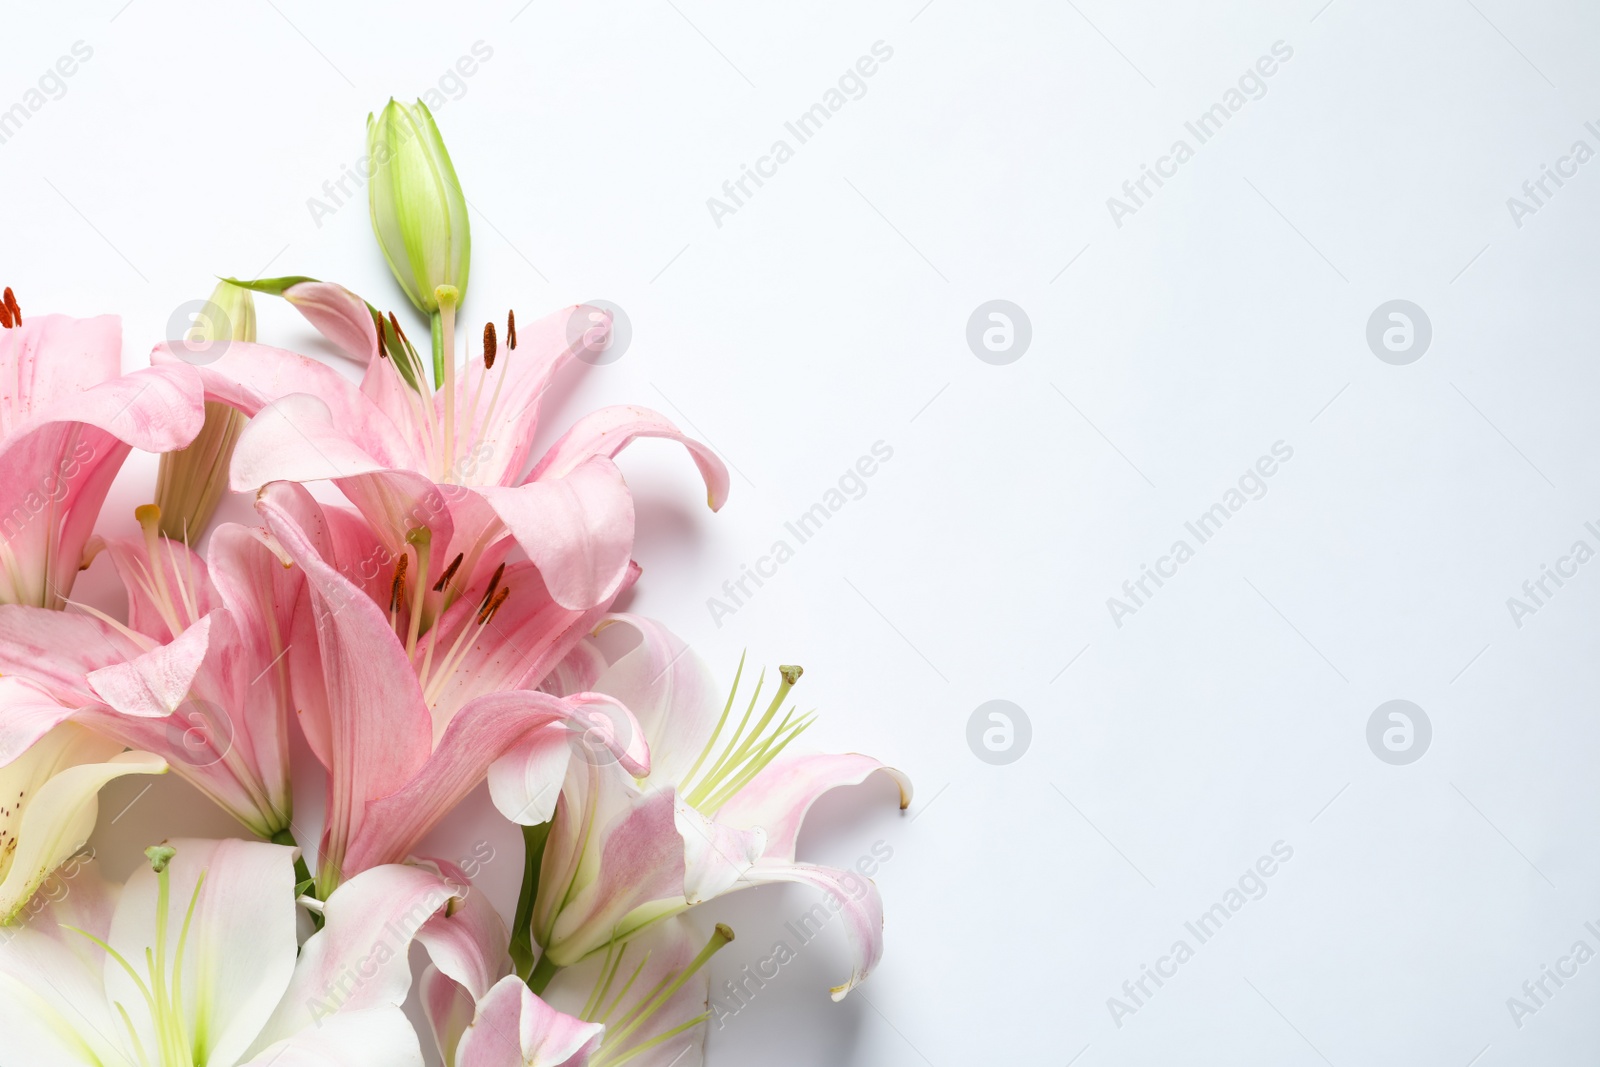 Photo of Composition with beautiful blooming lily flowers on white background